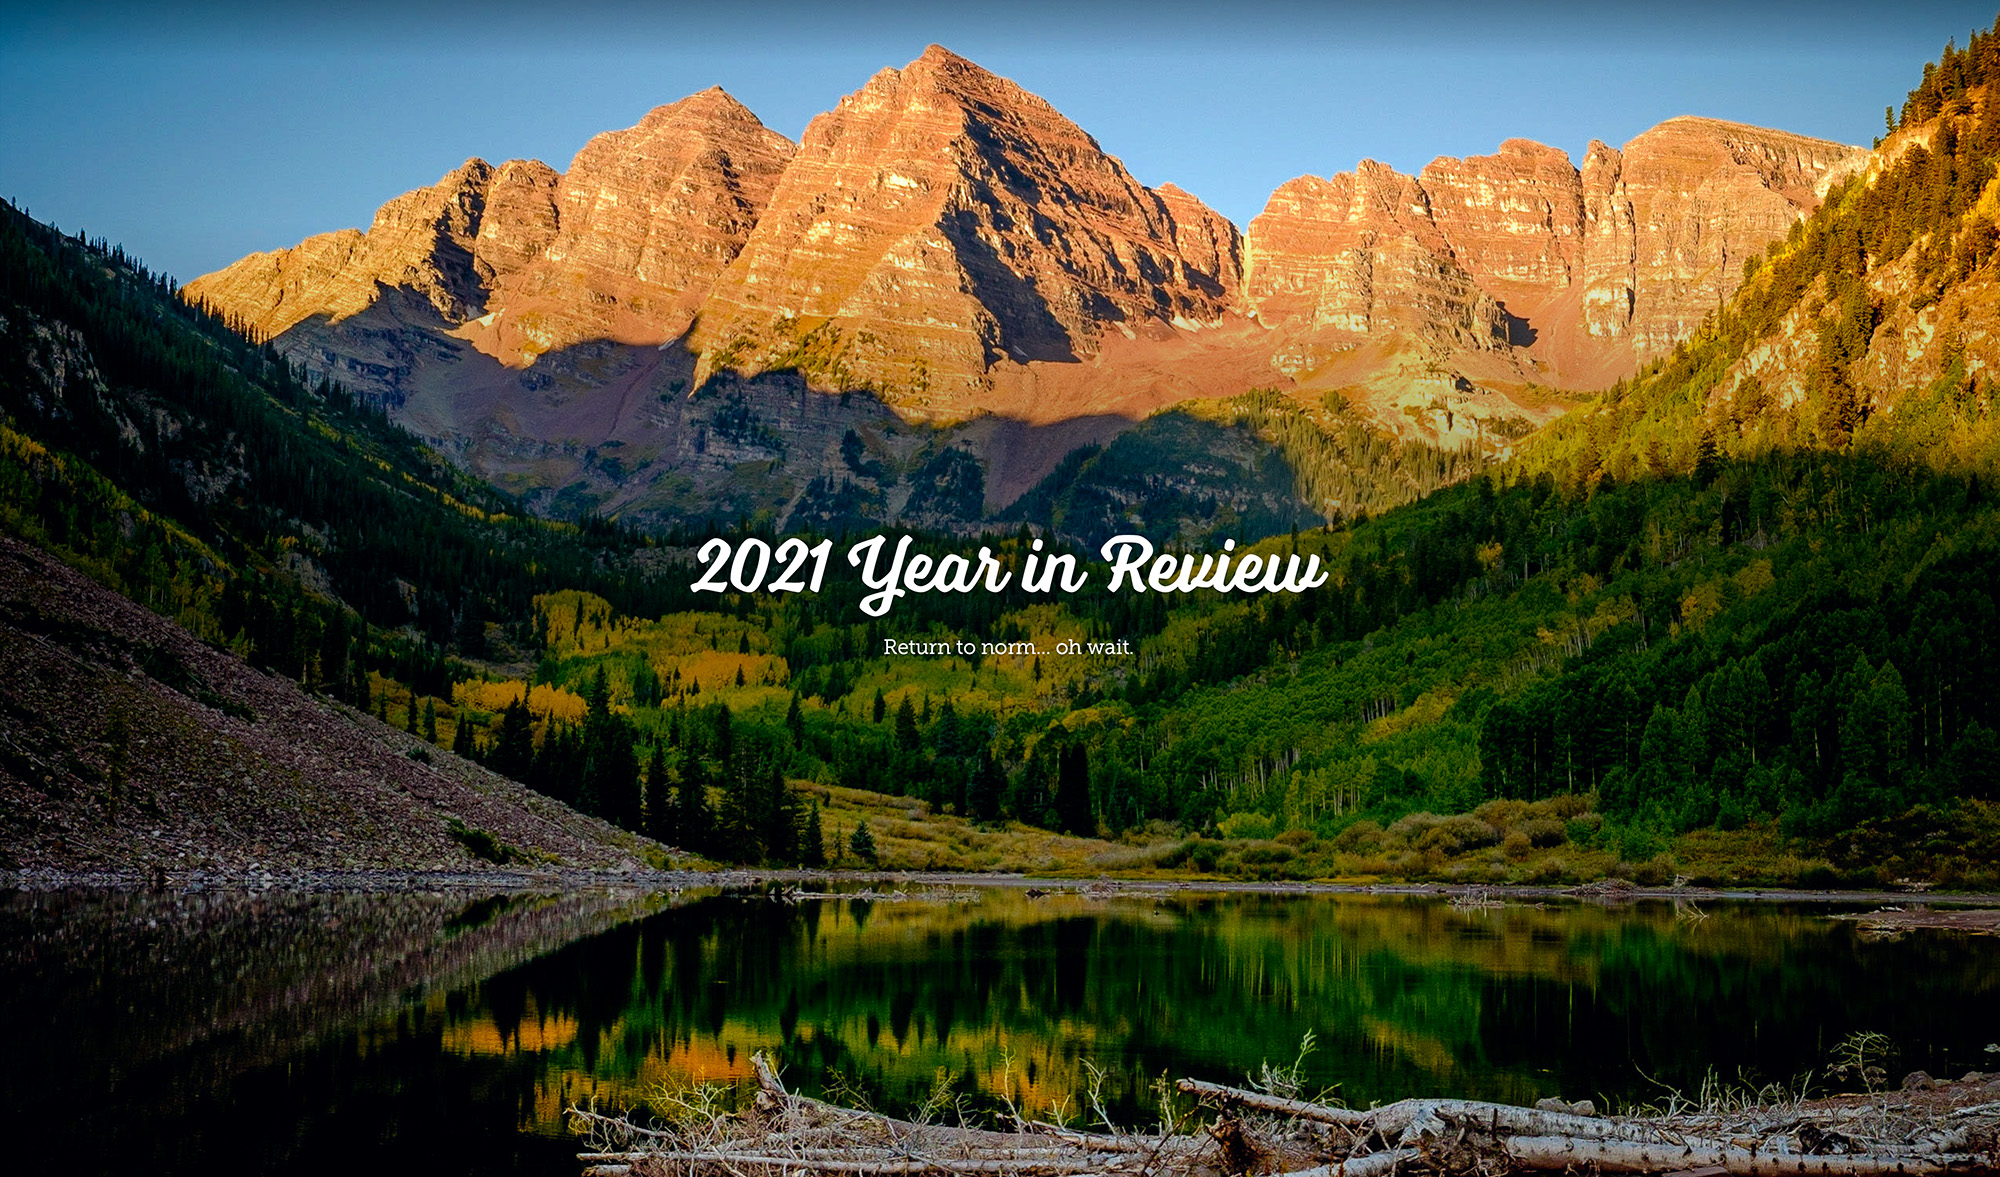 2021 year in review image of maroon bells colorado with sunrise light on the mountain peaks